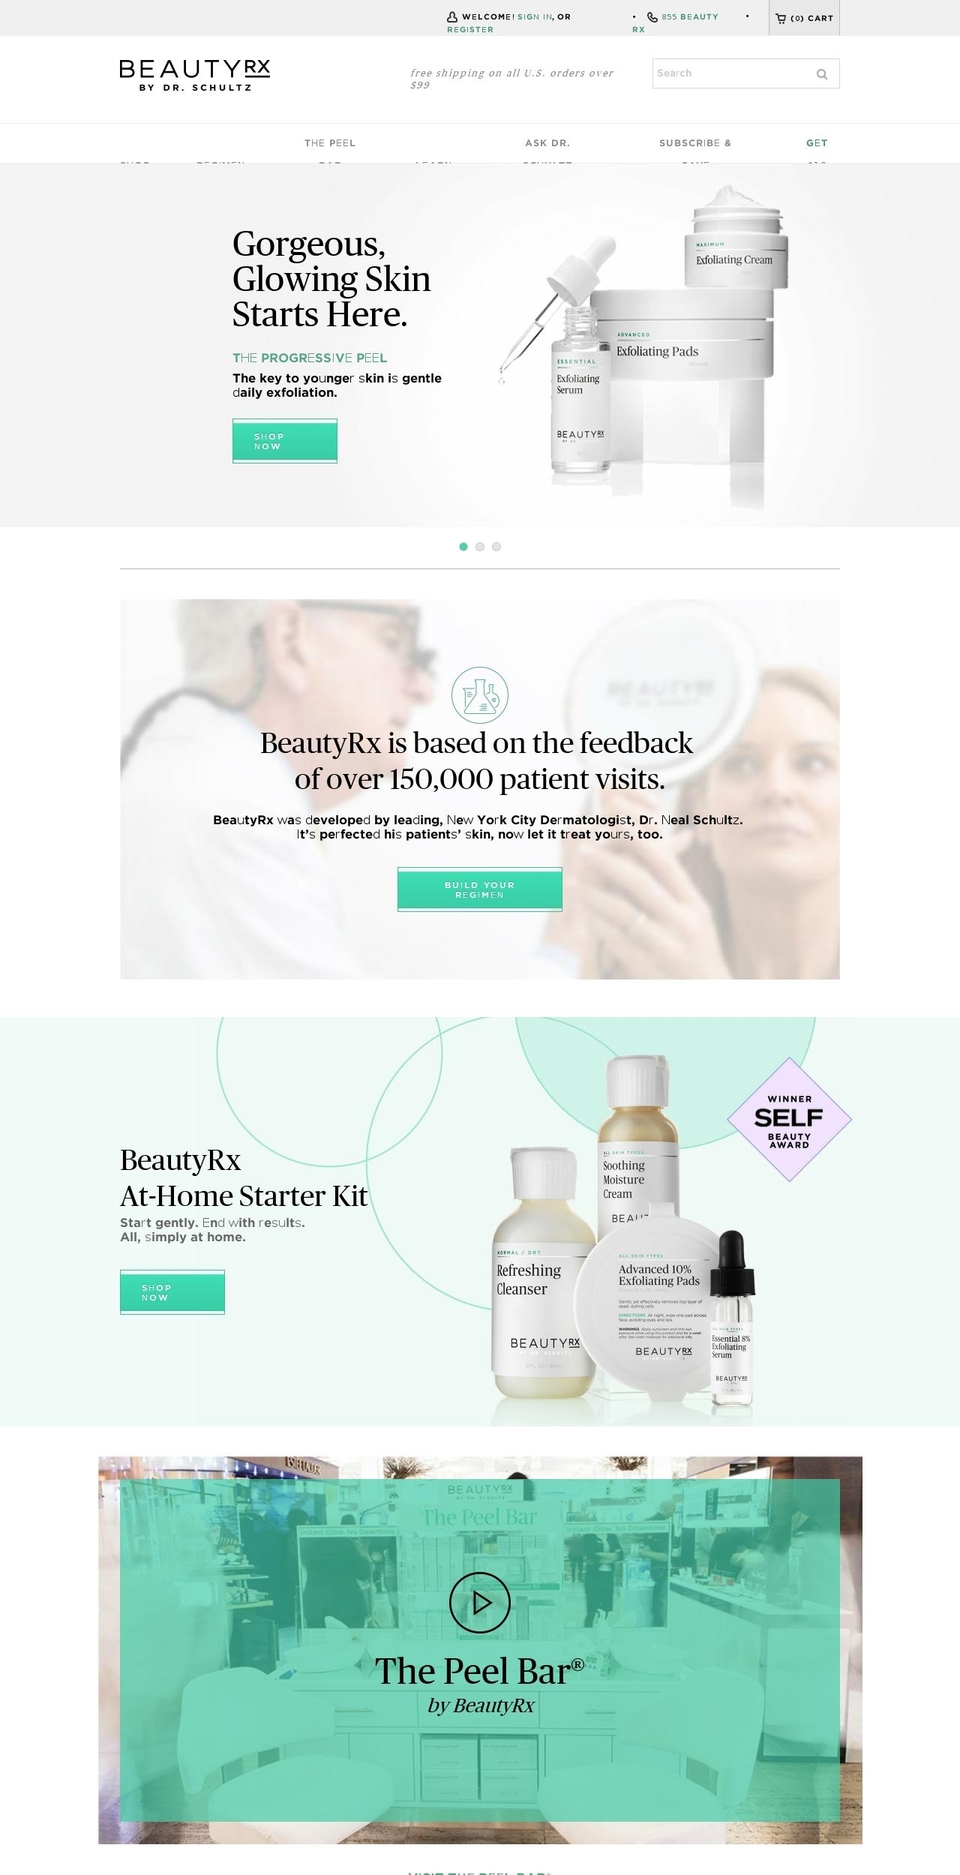 [Mob-20-Feb-18] Beauty RX [BR-248] Shopify theme site example beautyrx.info